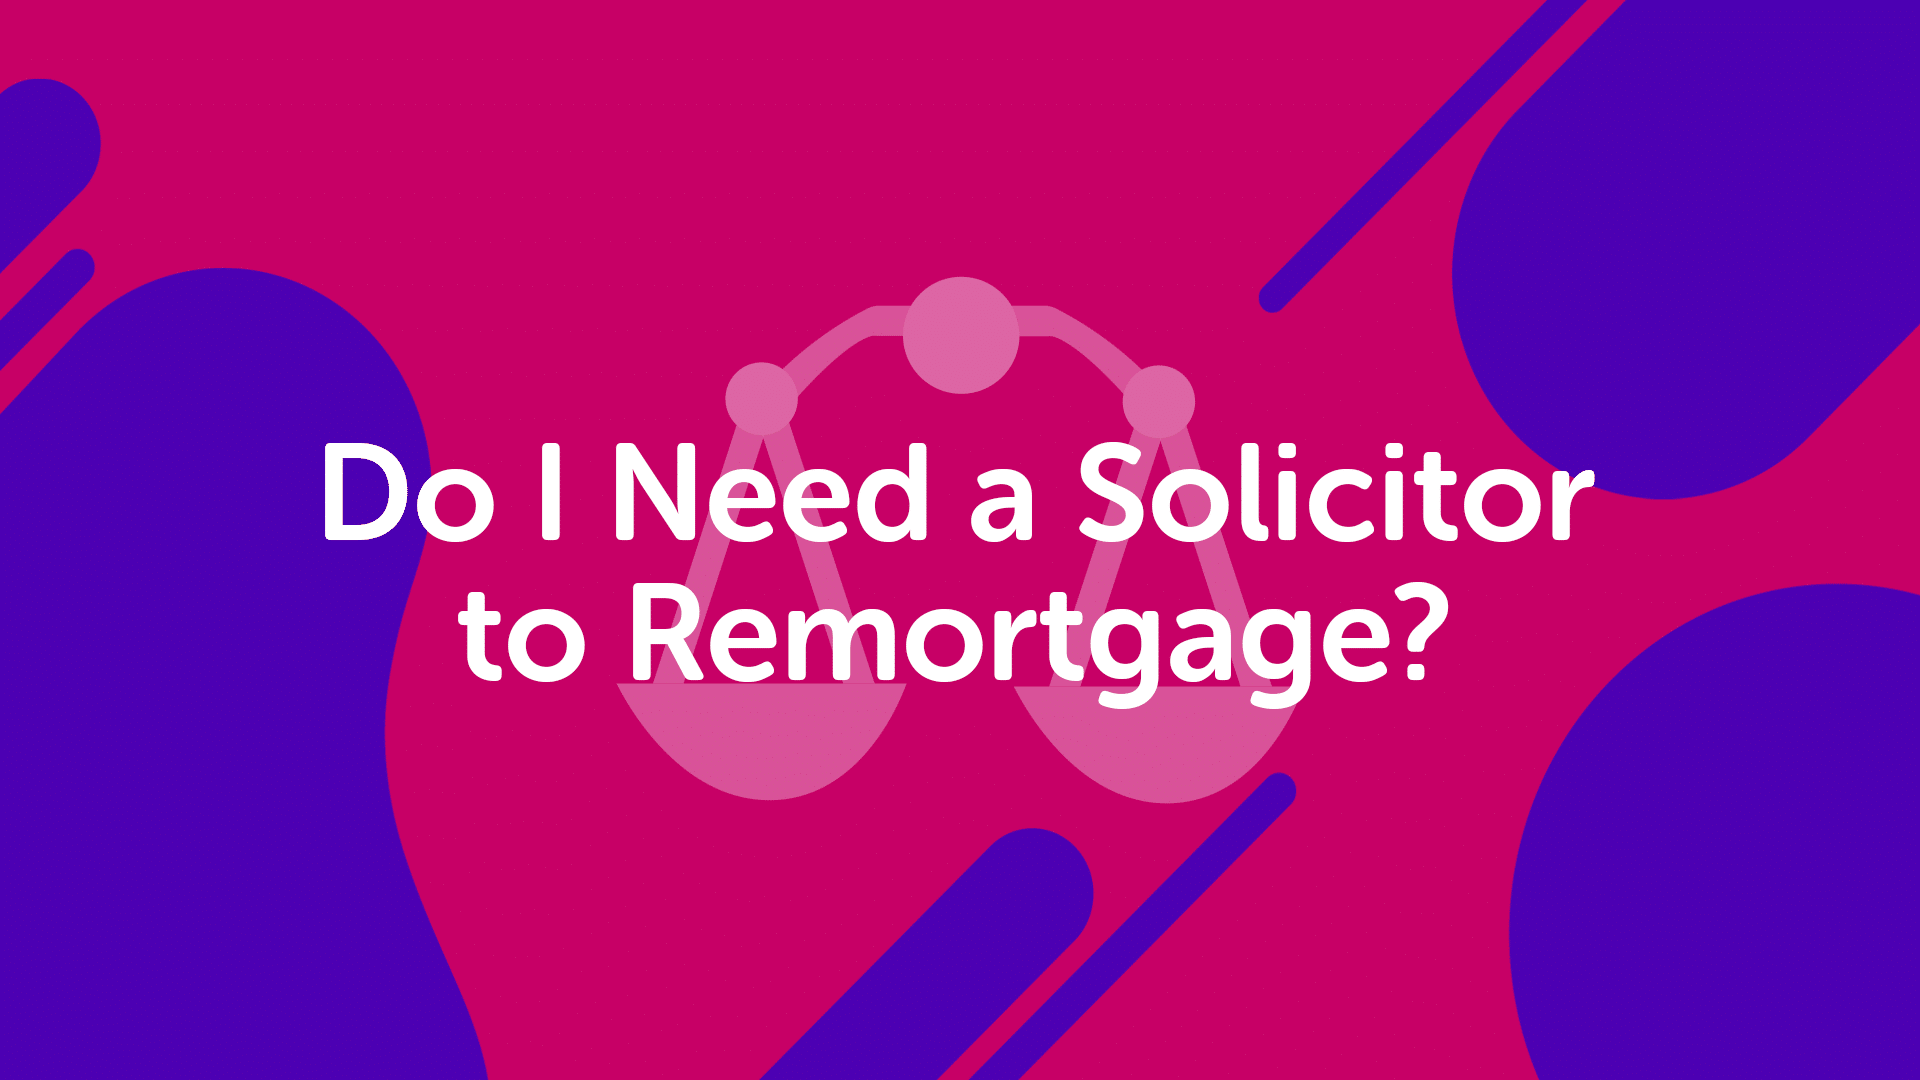 Do I need a solicitor to remortgage? Remortgage advice